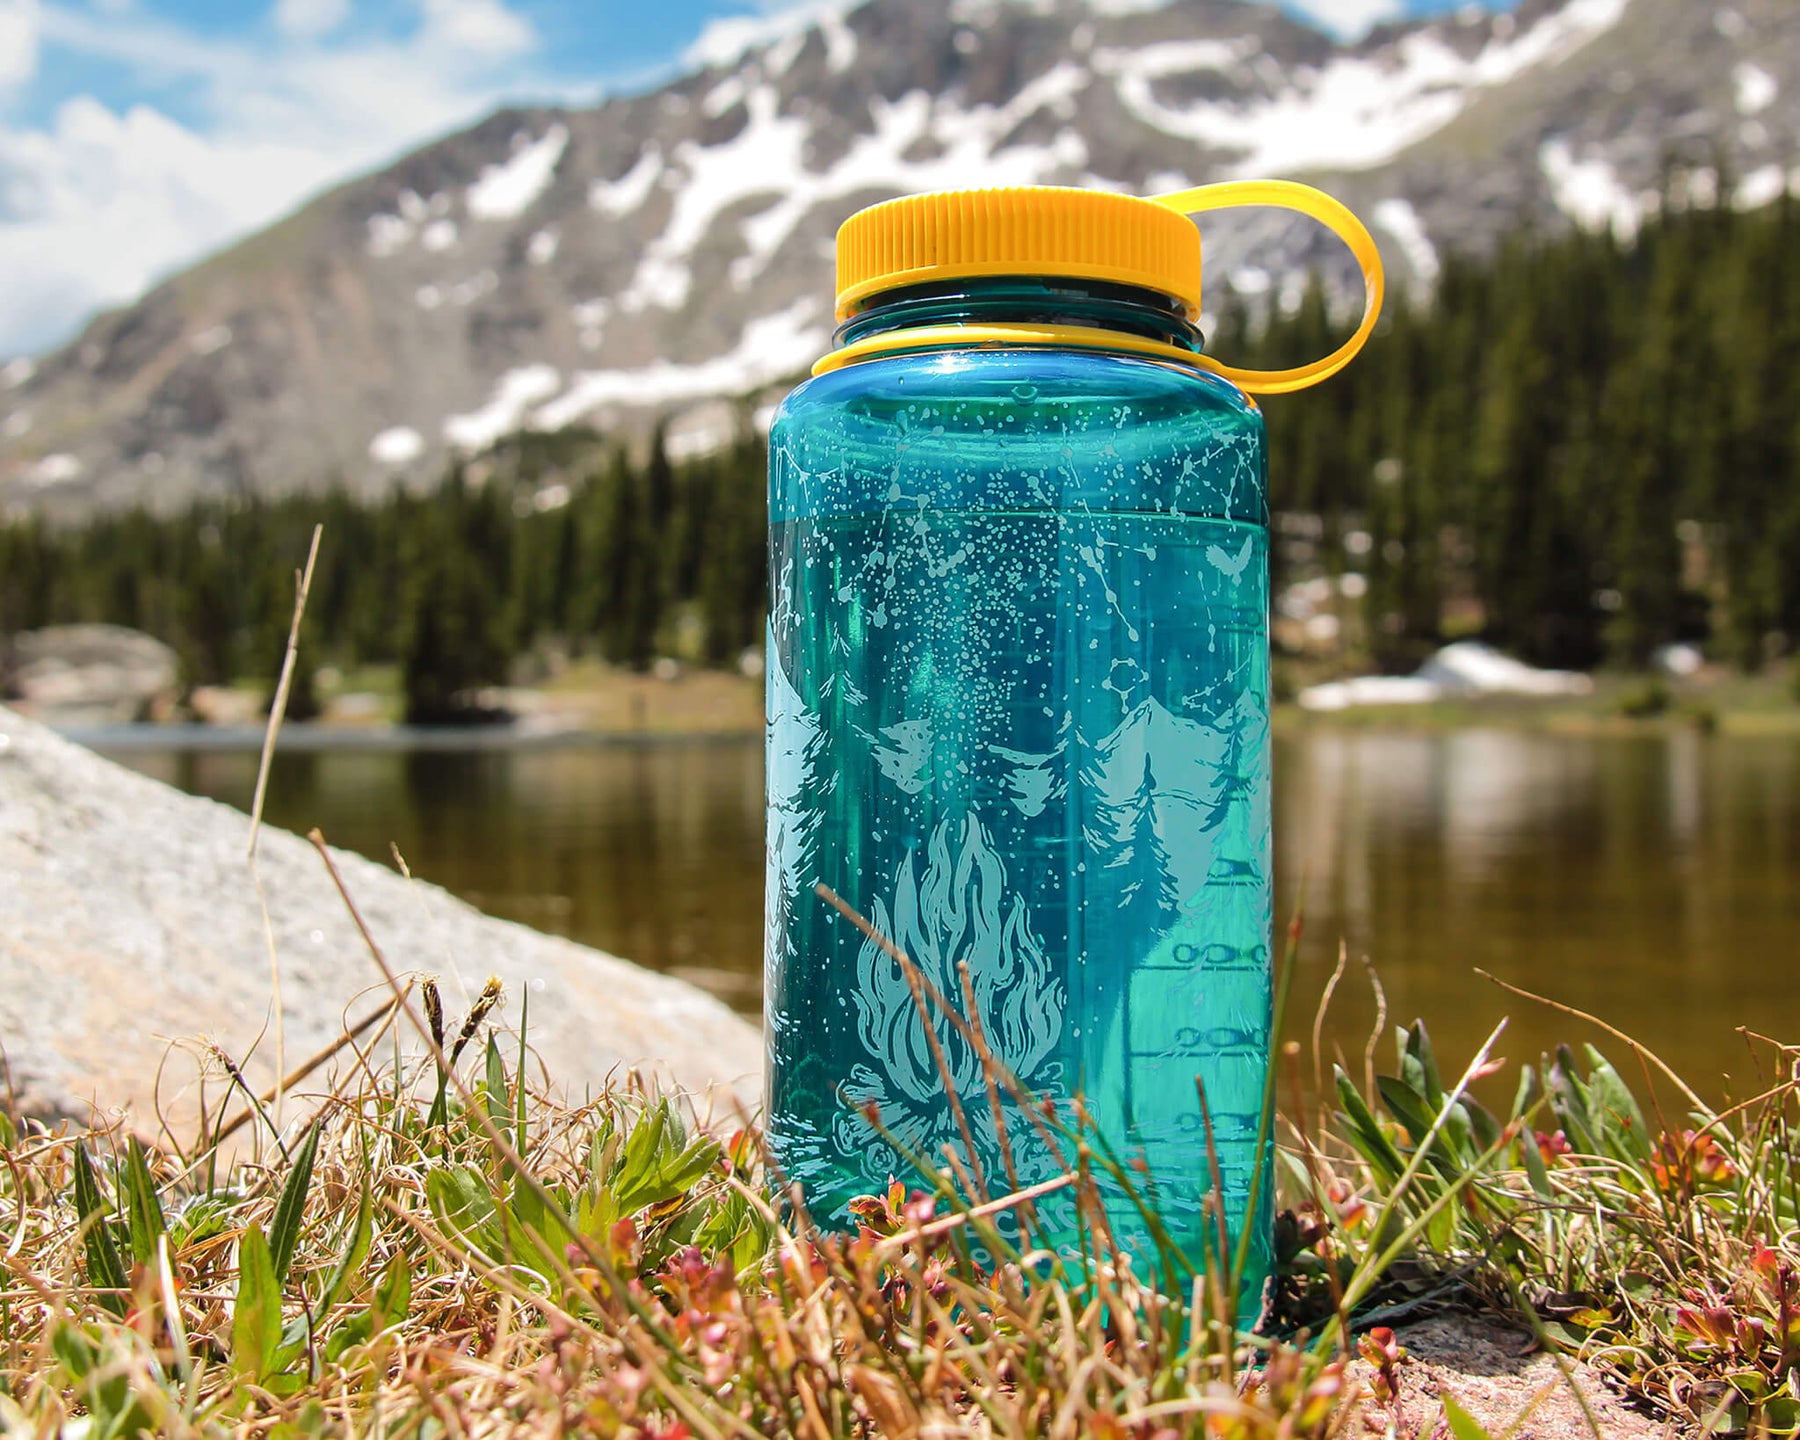 https://cdn.shopify.com/s/files/1/0509/4306/6294/products/WB108_Campfire_Constellations_Water_Bottle_1_1800x1800.jpg?v=1660154222